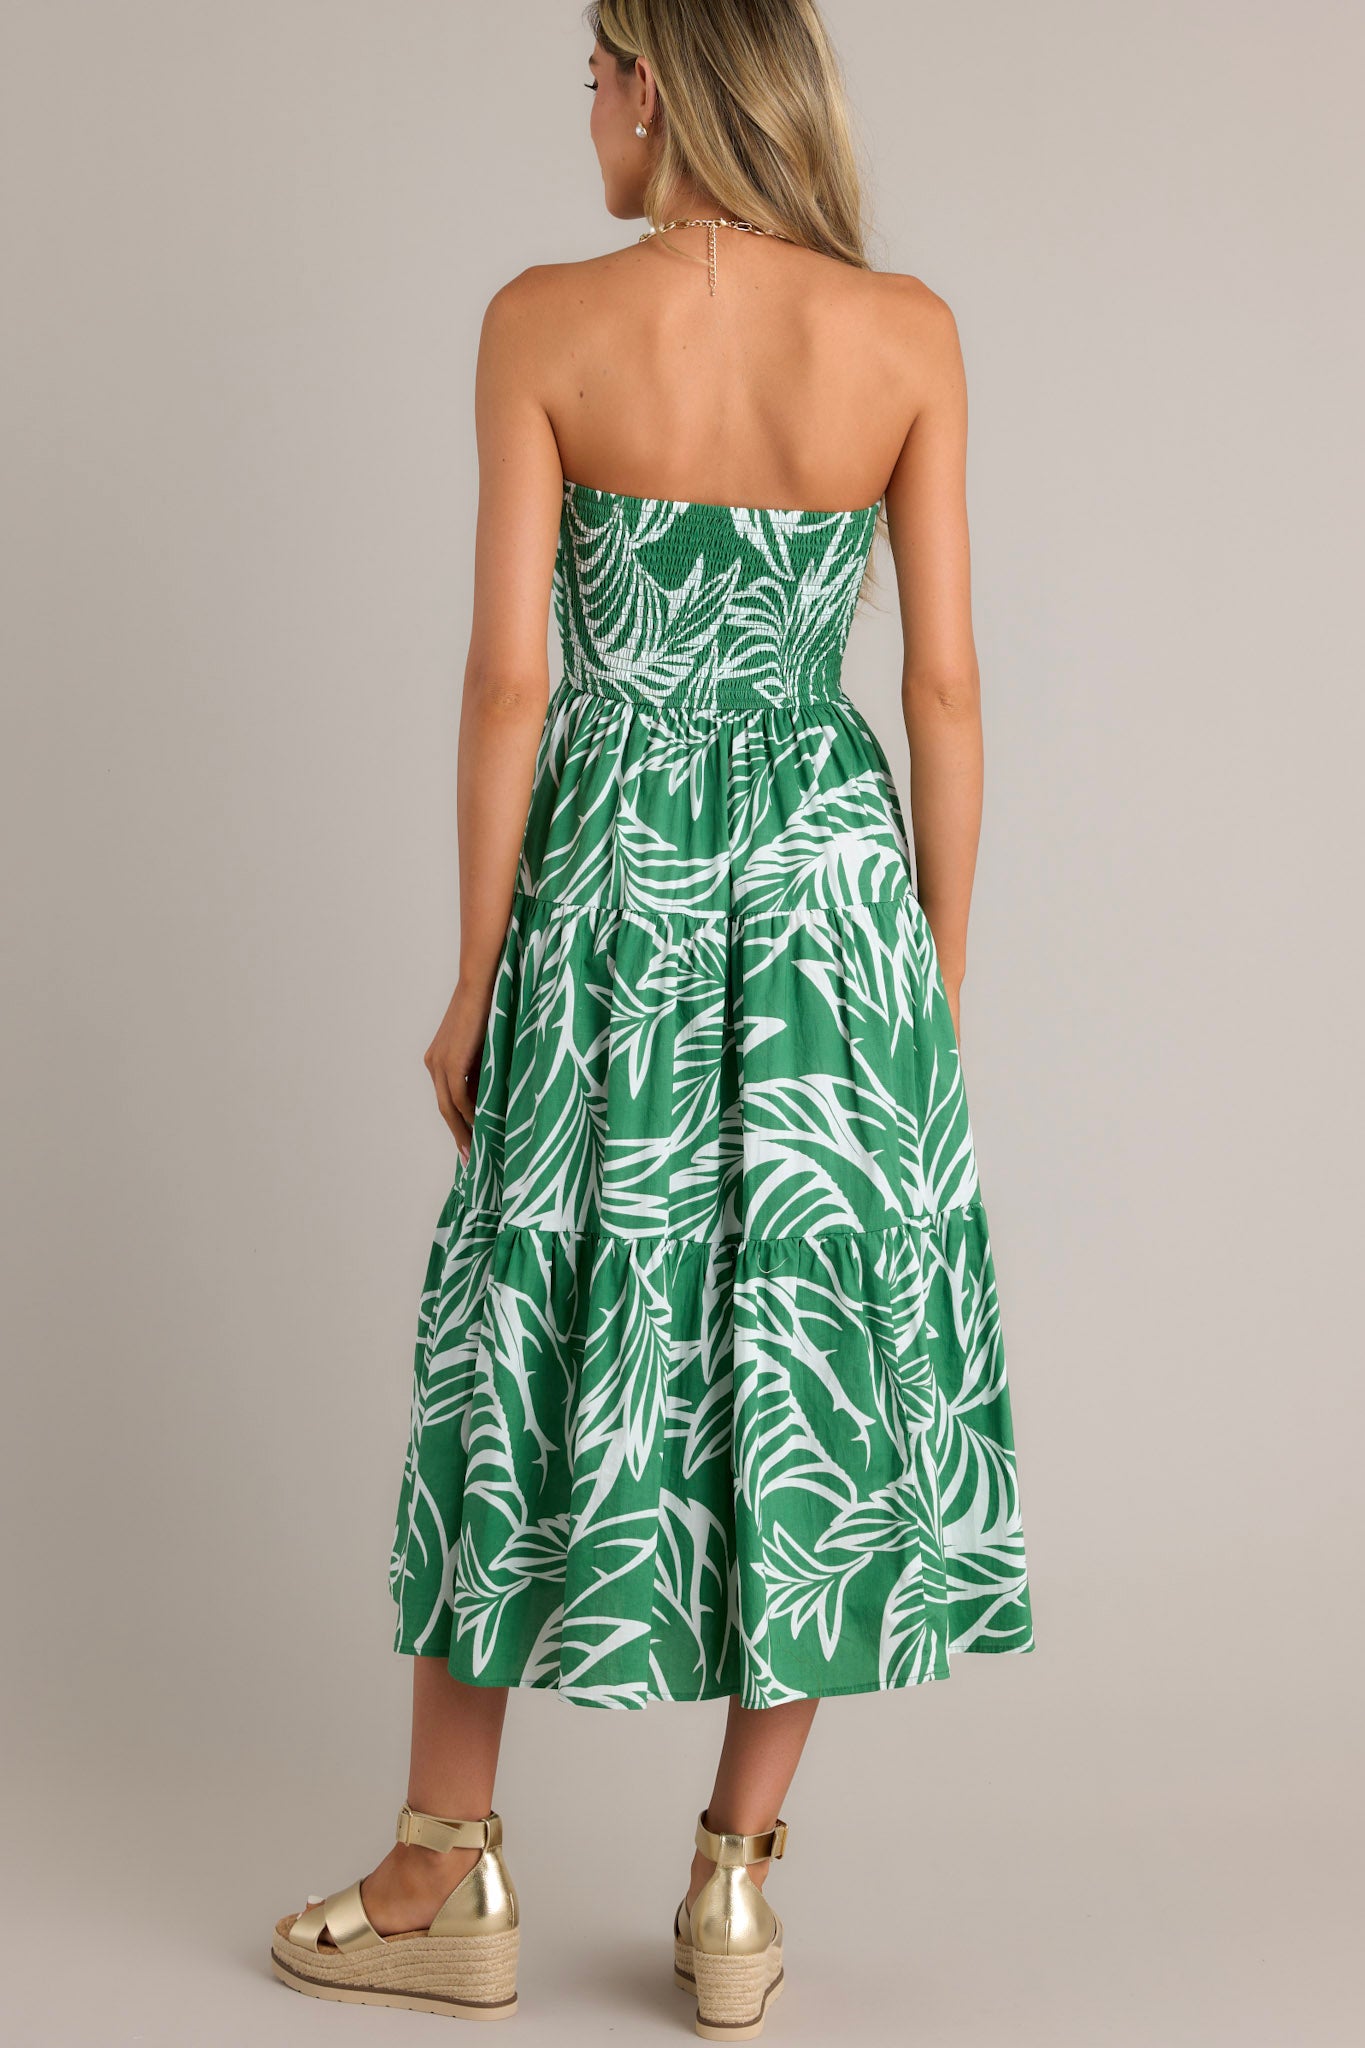 Back view of a green midi dress highlighting the fully smocked insert in the back, the strapless neckline, and the tiered design.